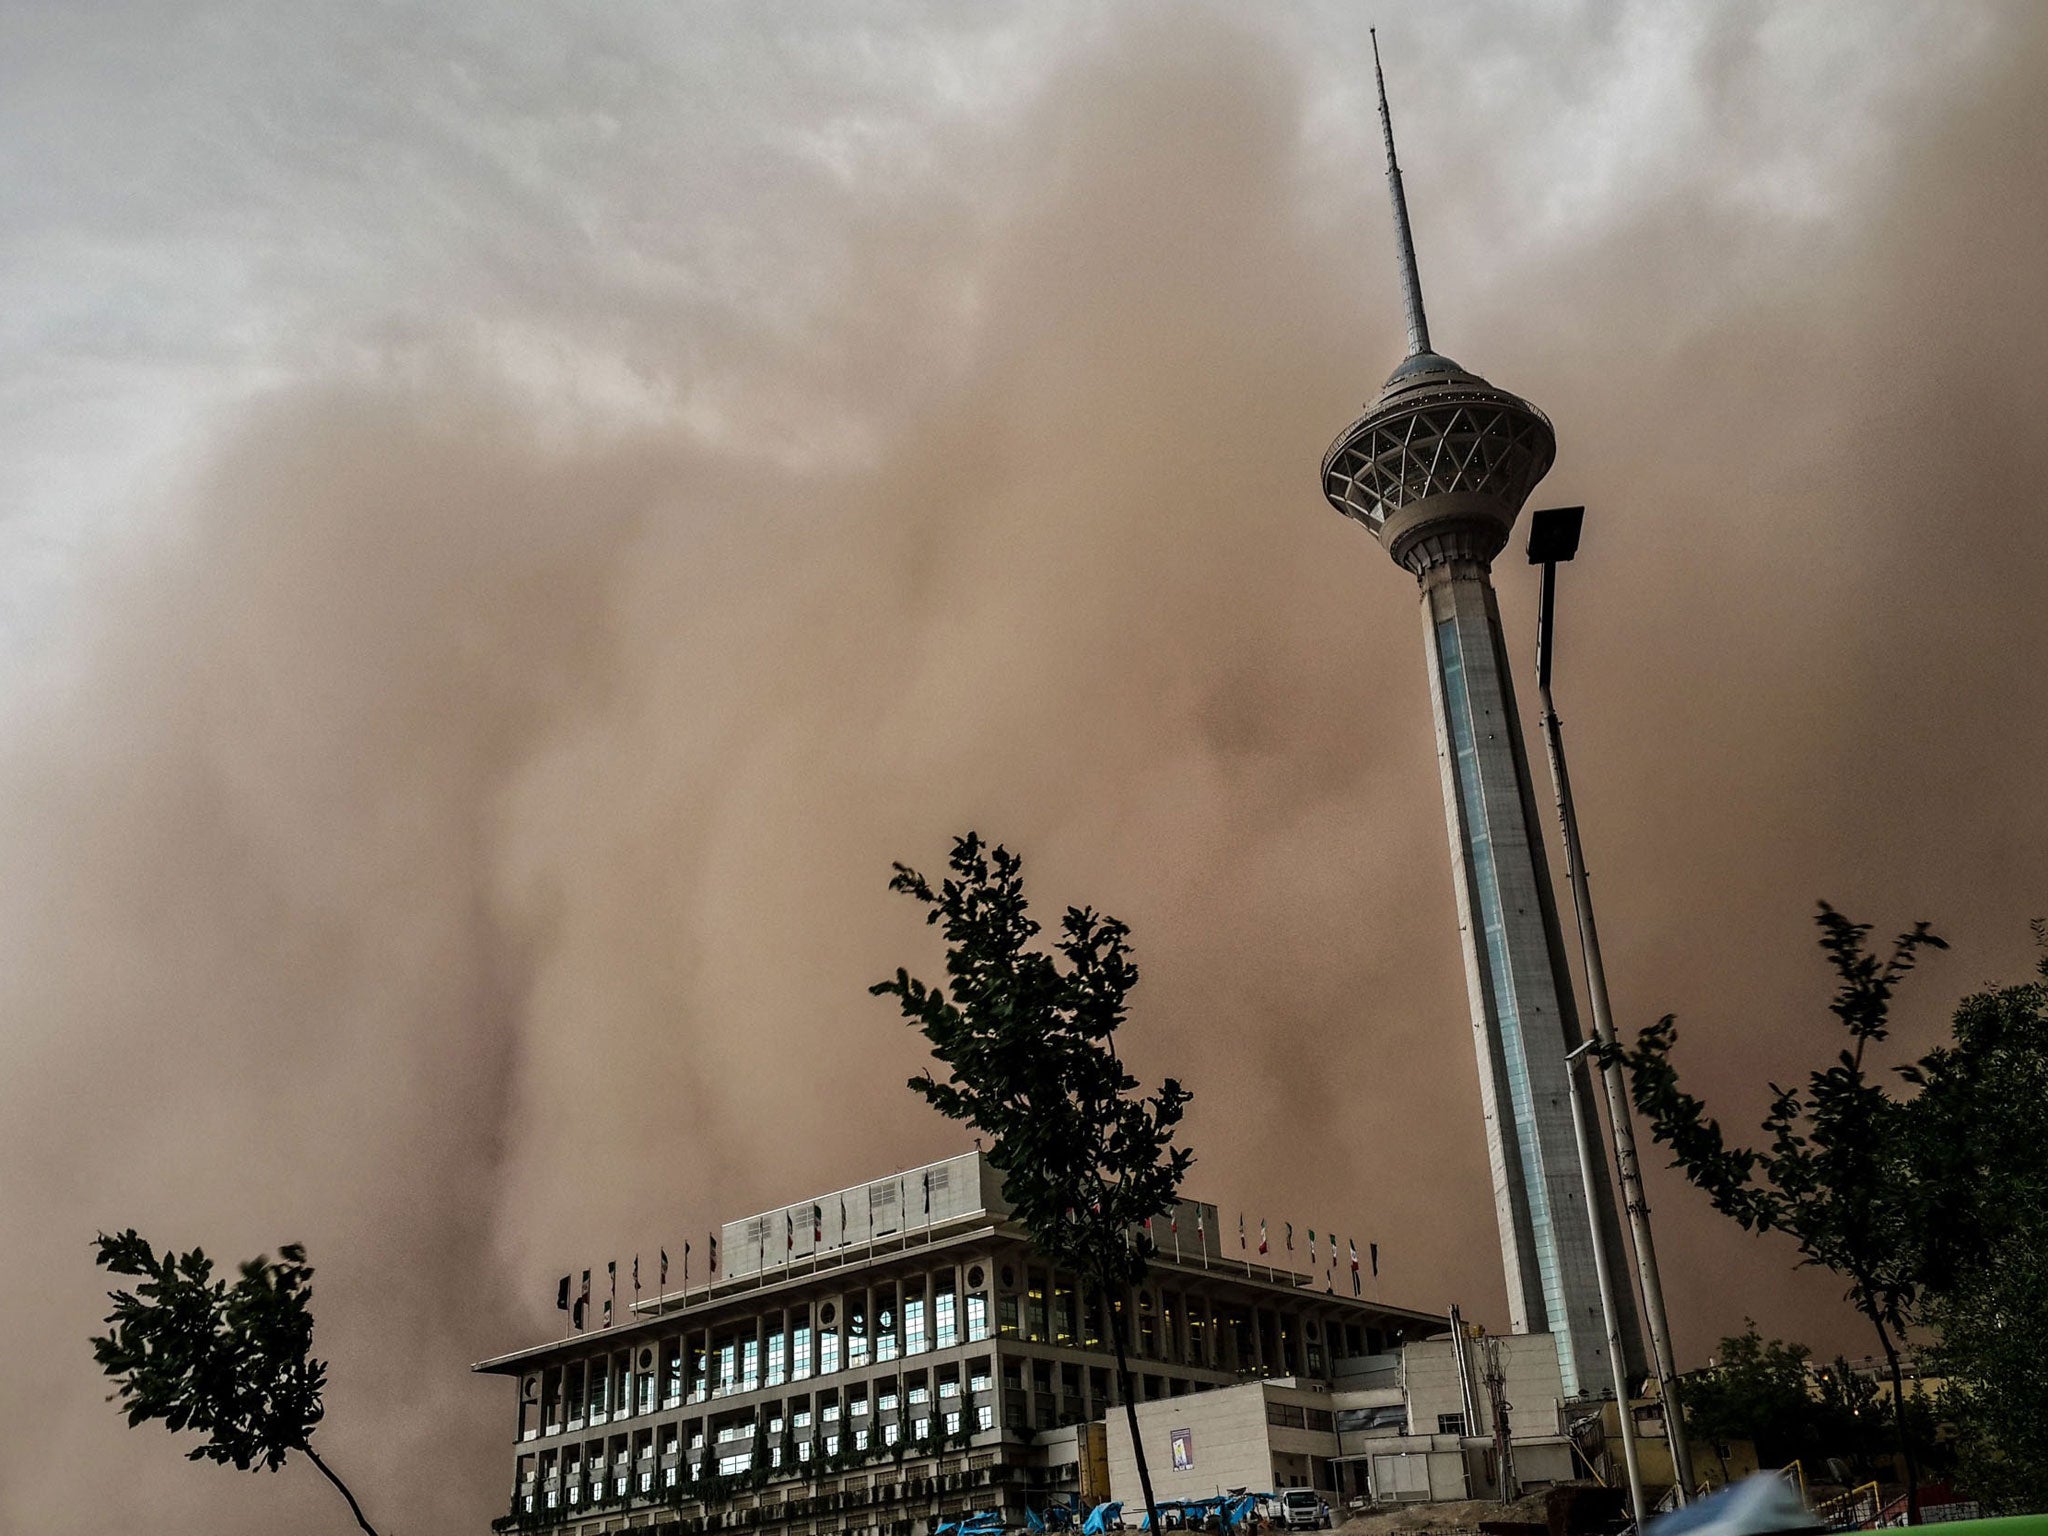 A massive sandstorm and record wind plunged the city into darkness, knocking out power supplies, damaging buildings and causing massive disruption